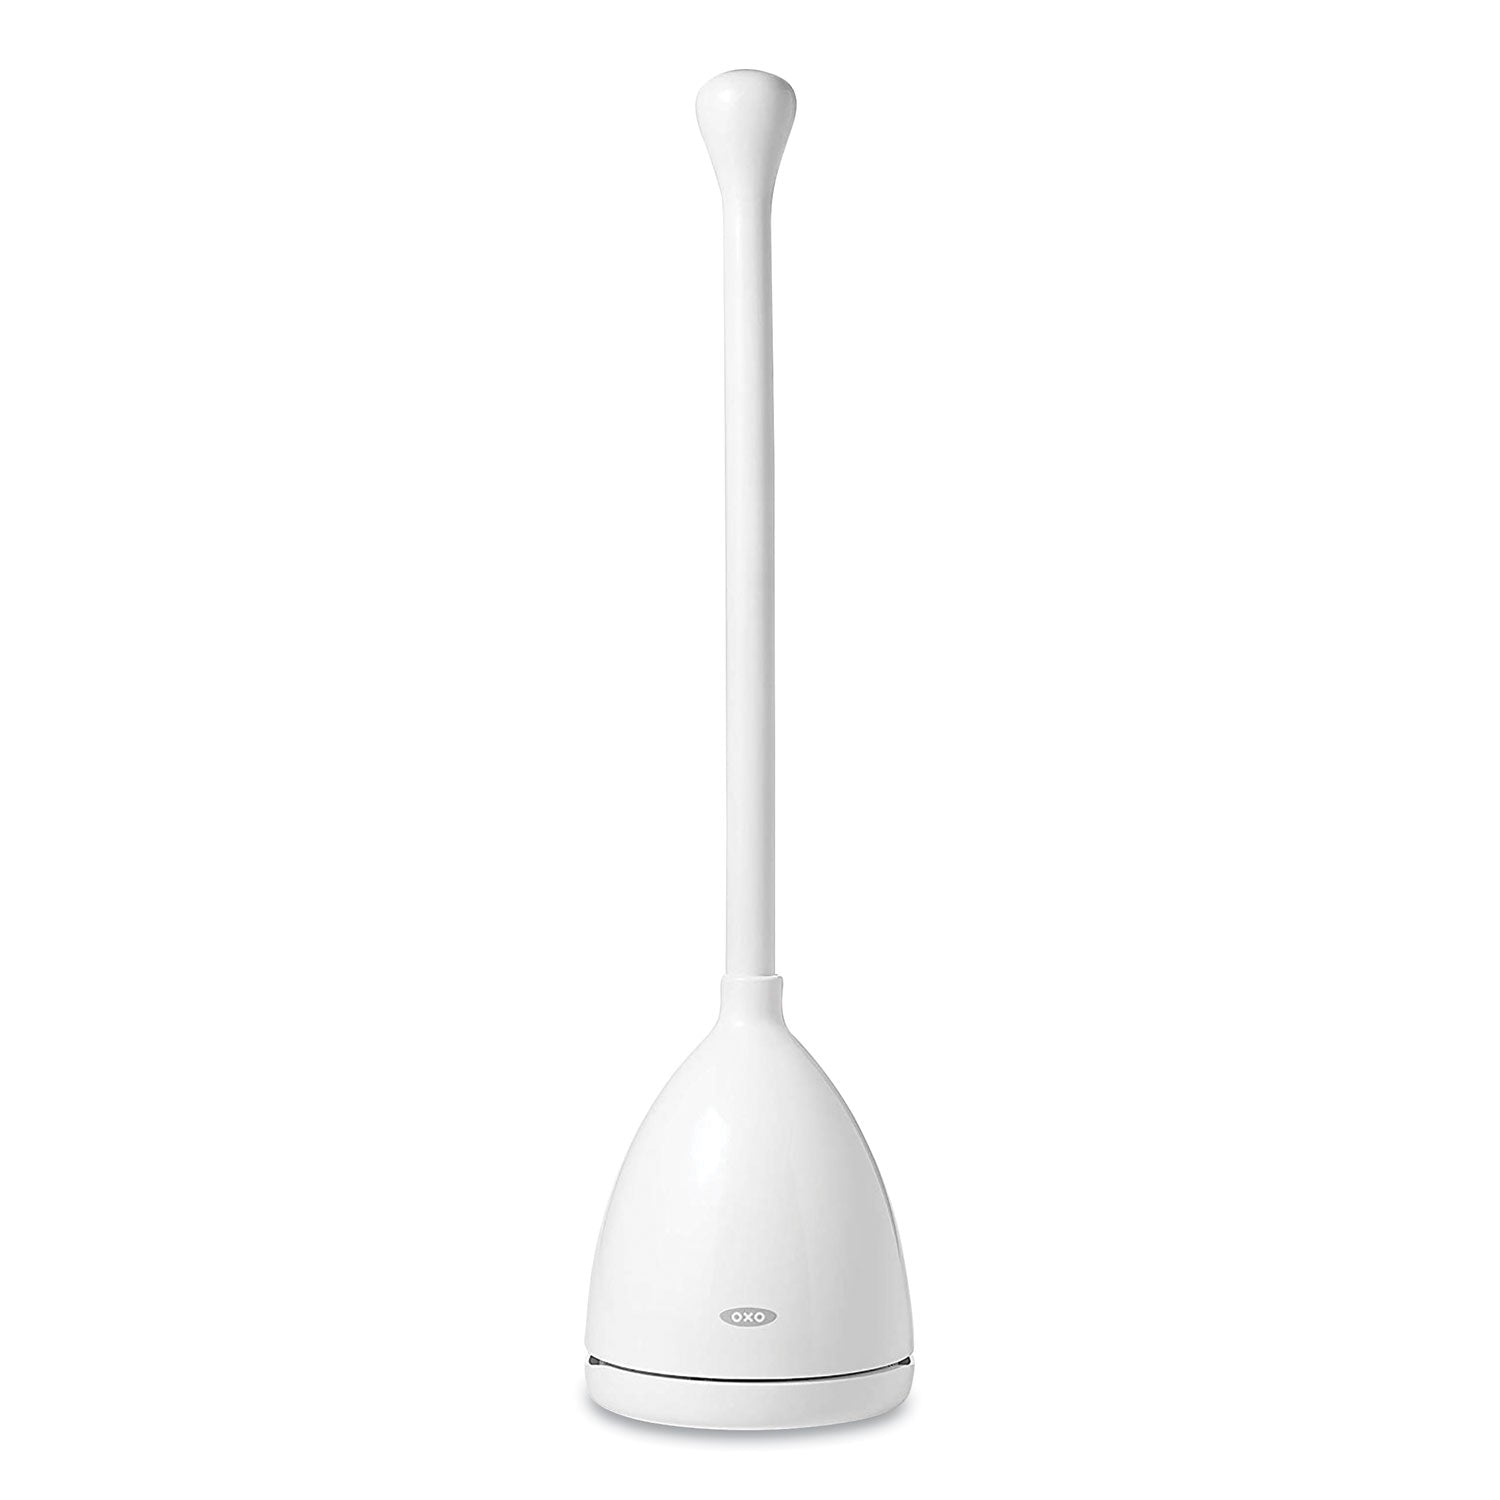 good-grips-toilet-plunger-and-canister-24-plastic-handle-6-dia-white_oxo12241700 - 1